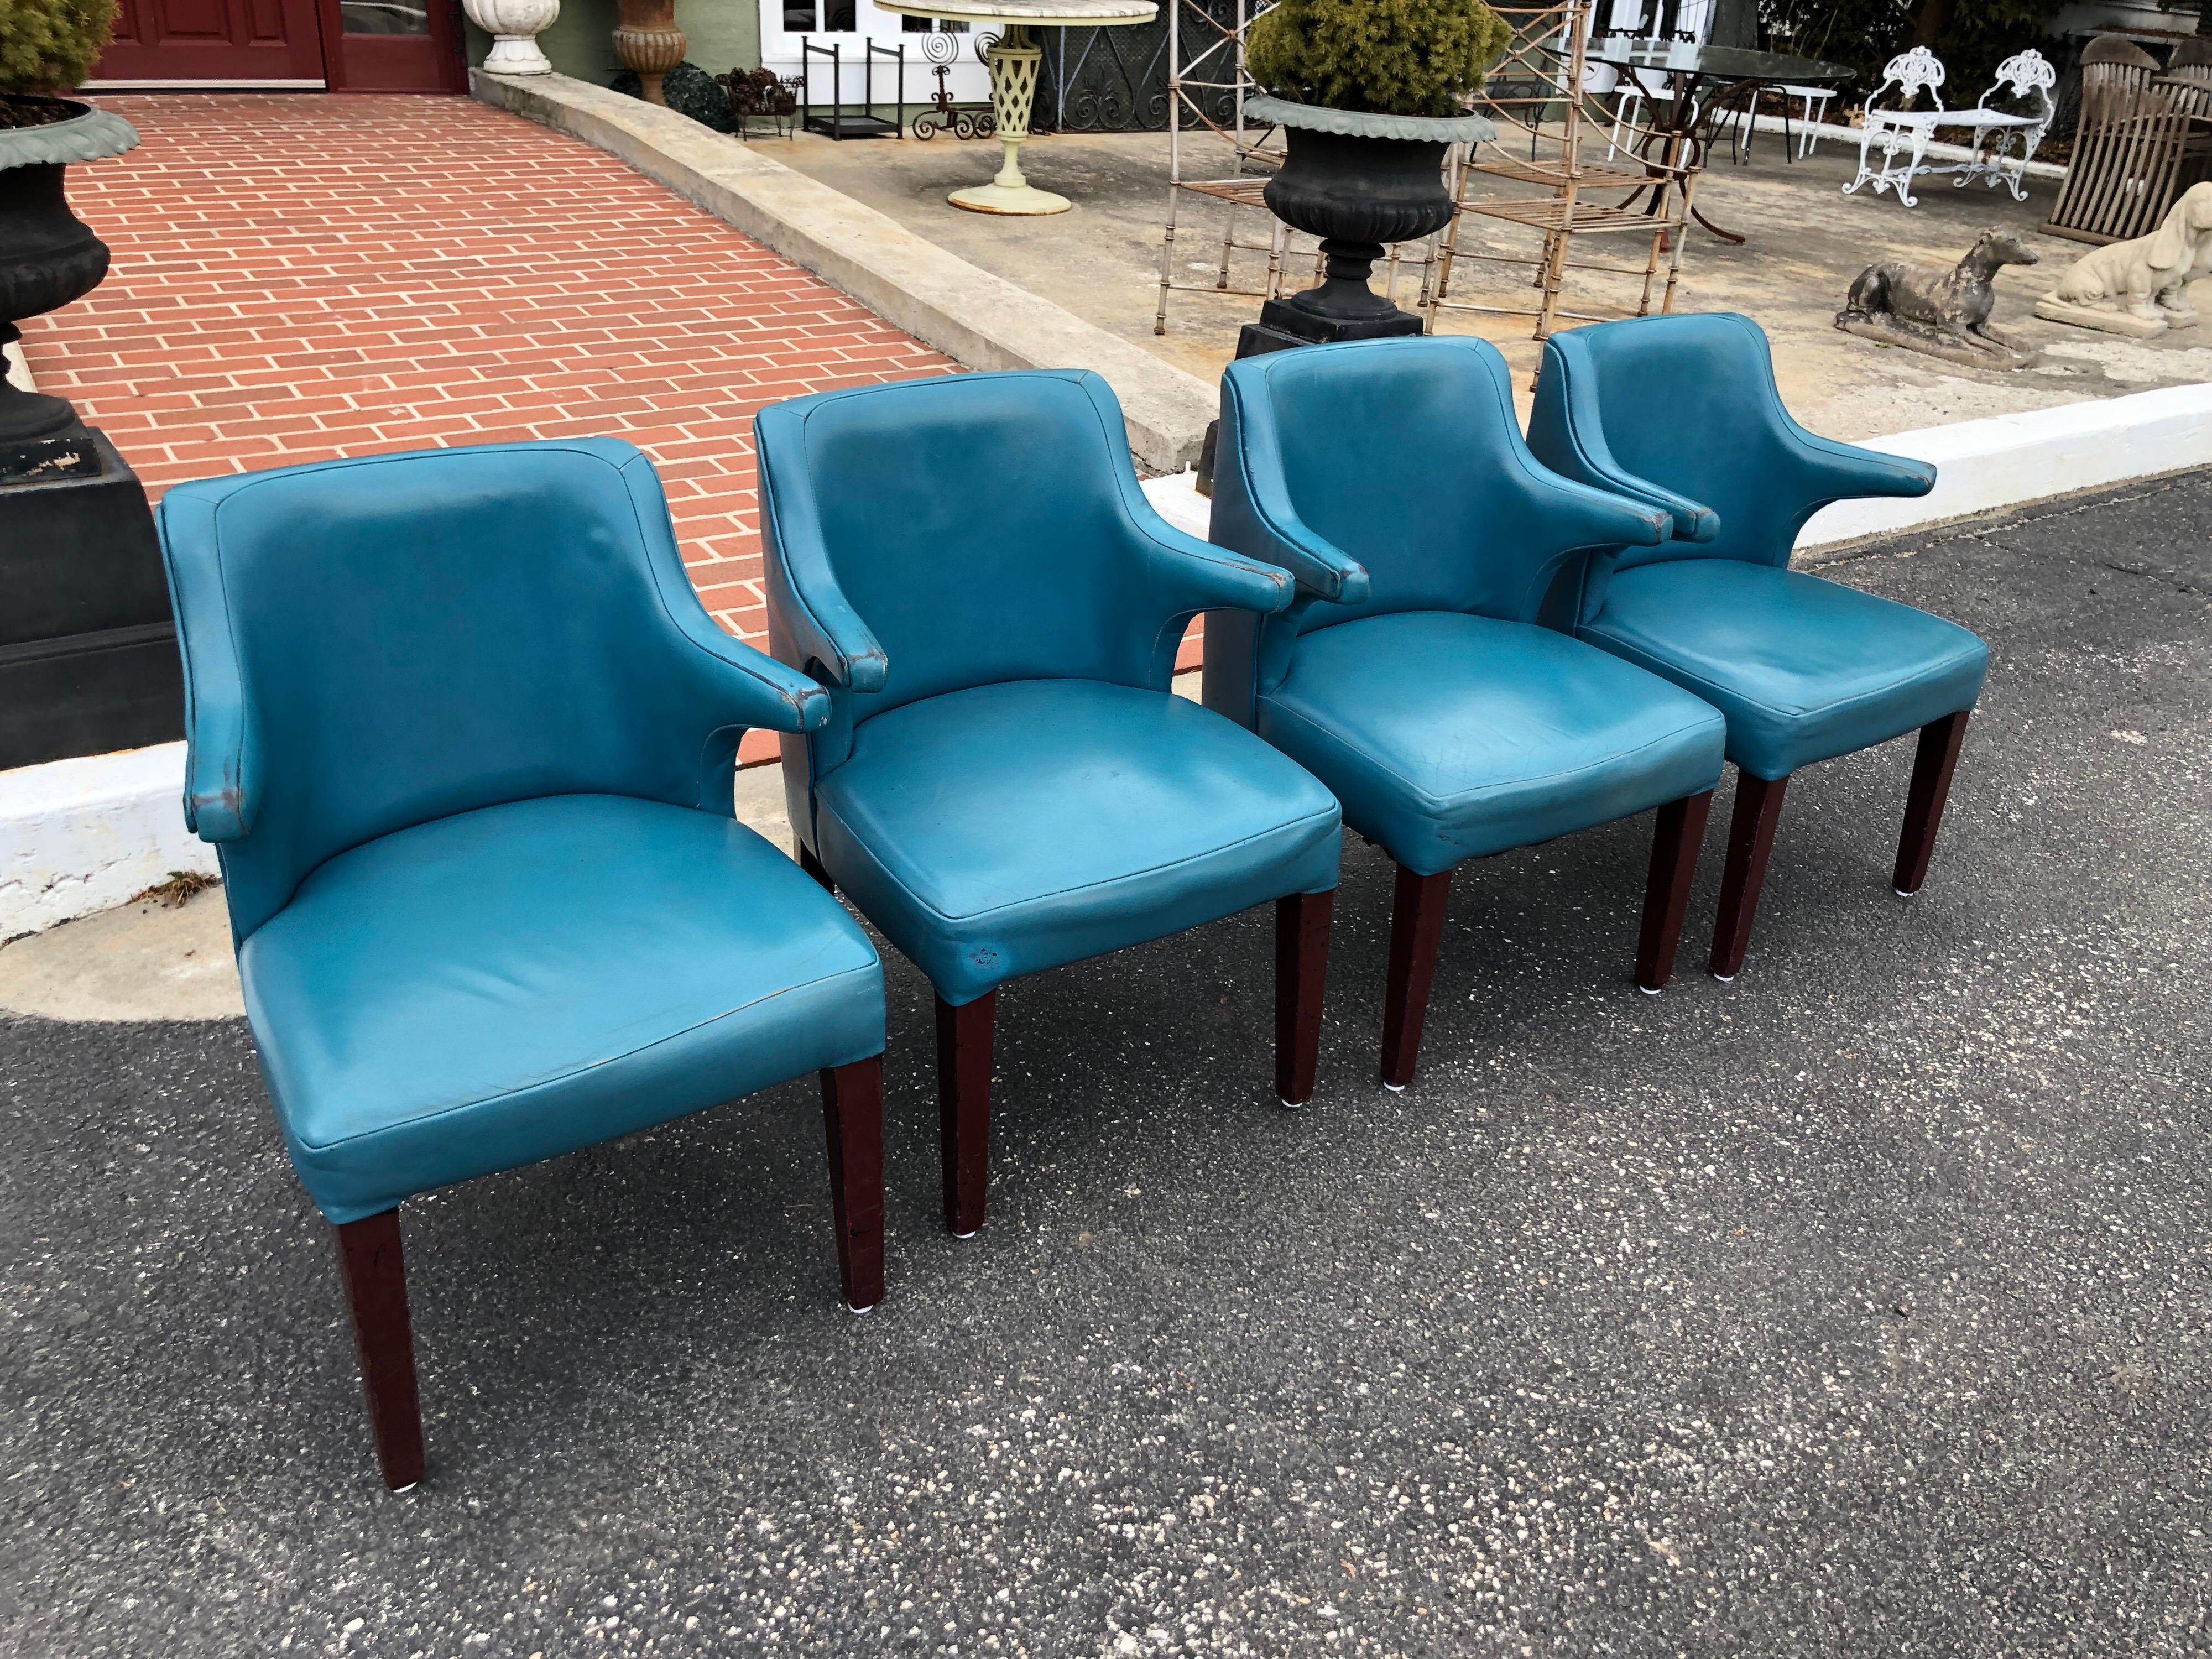 Set of Four Mid-Century Modern Chairs in Peacock Blue 1